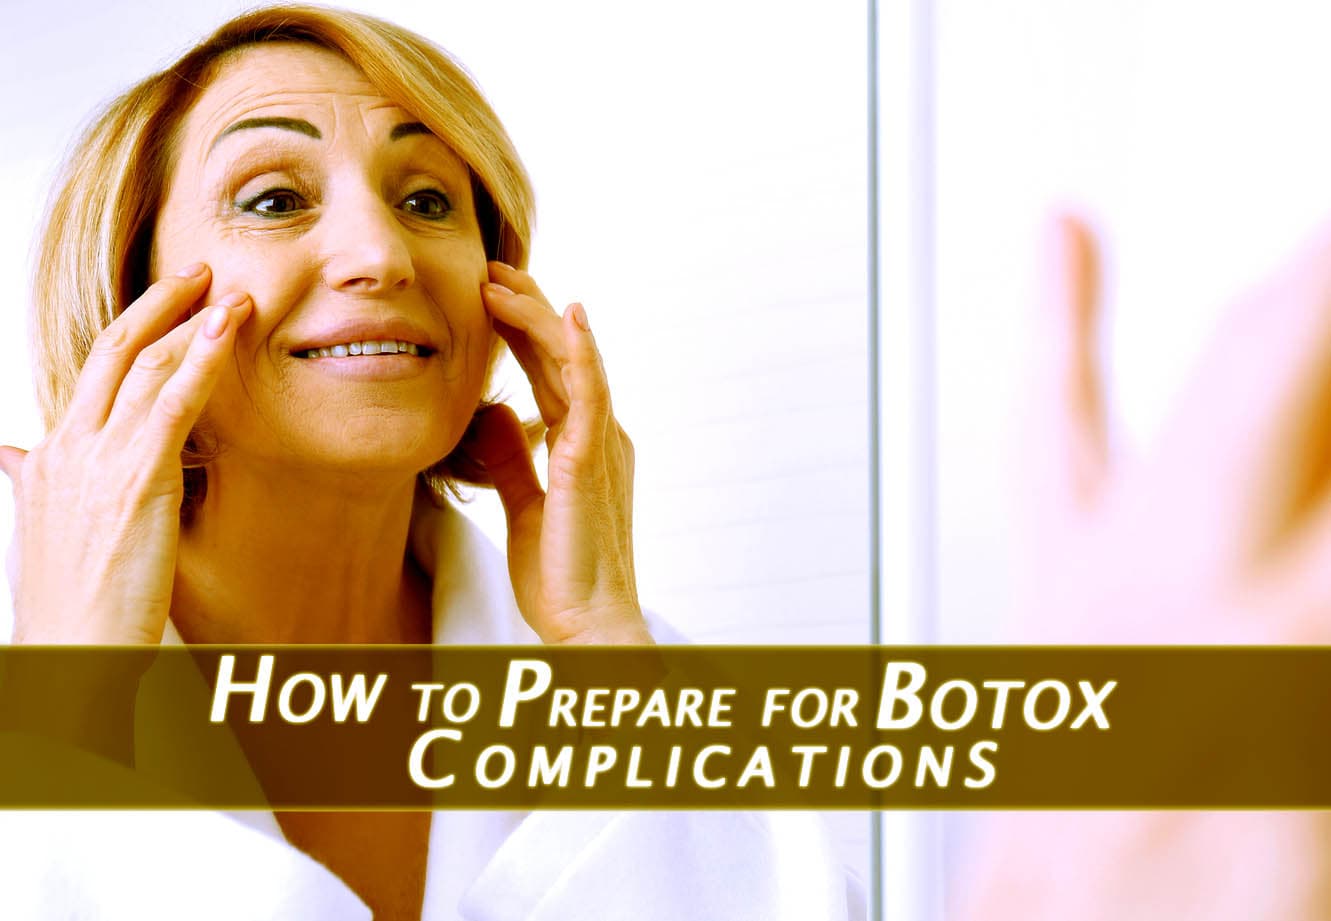 What are Botox Side Effects